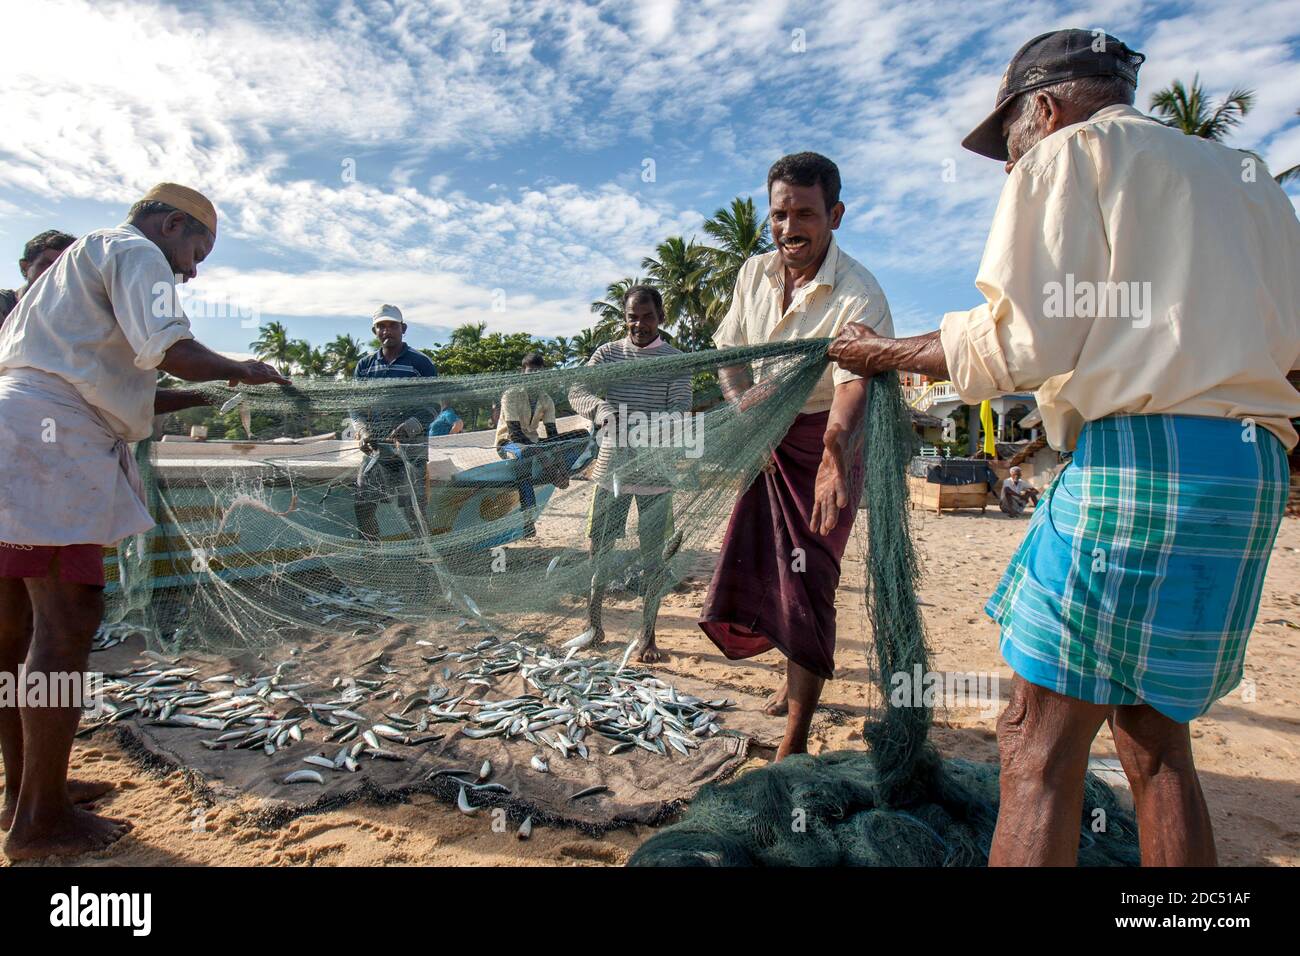 Fishermen remove their catch from their nets on Arugam Bay beach